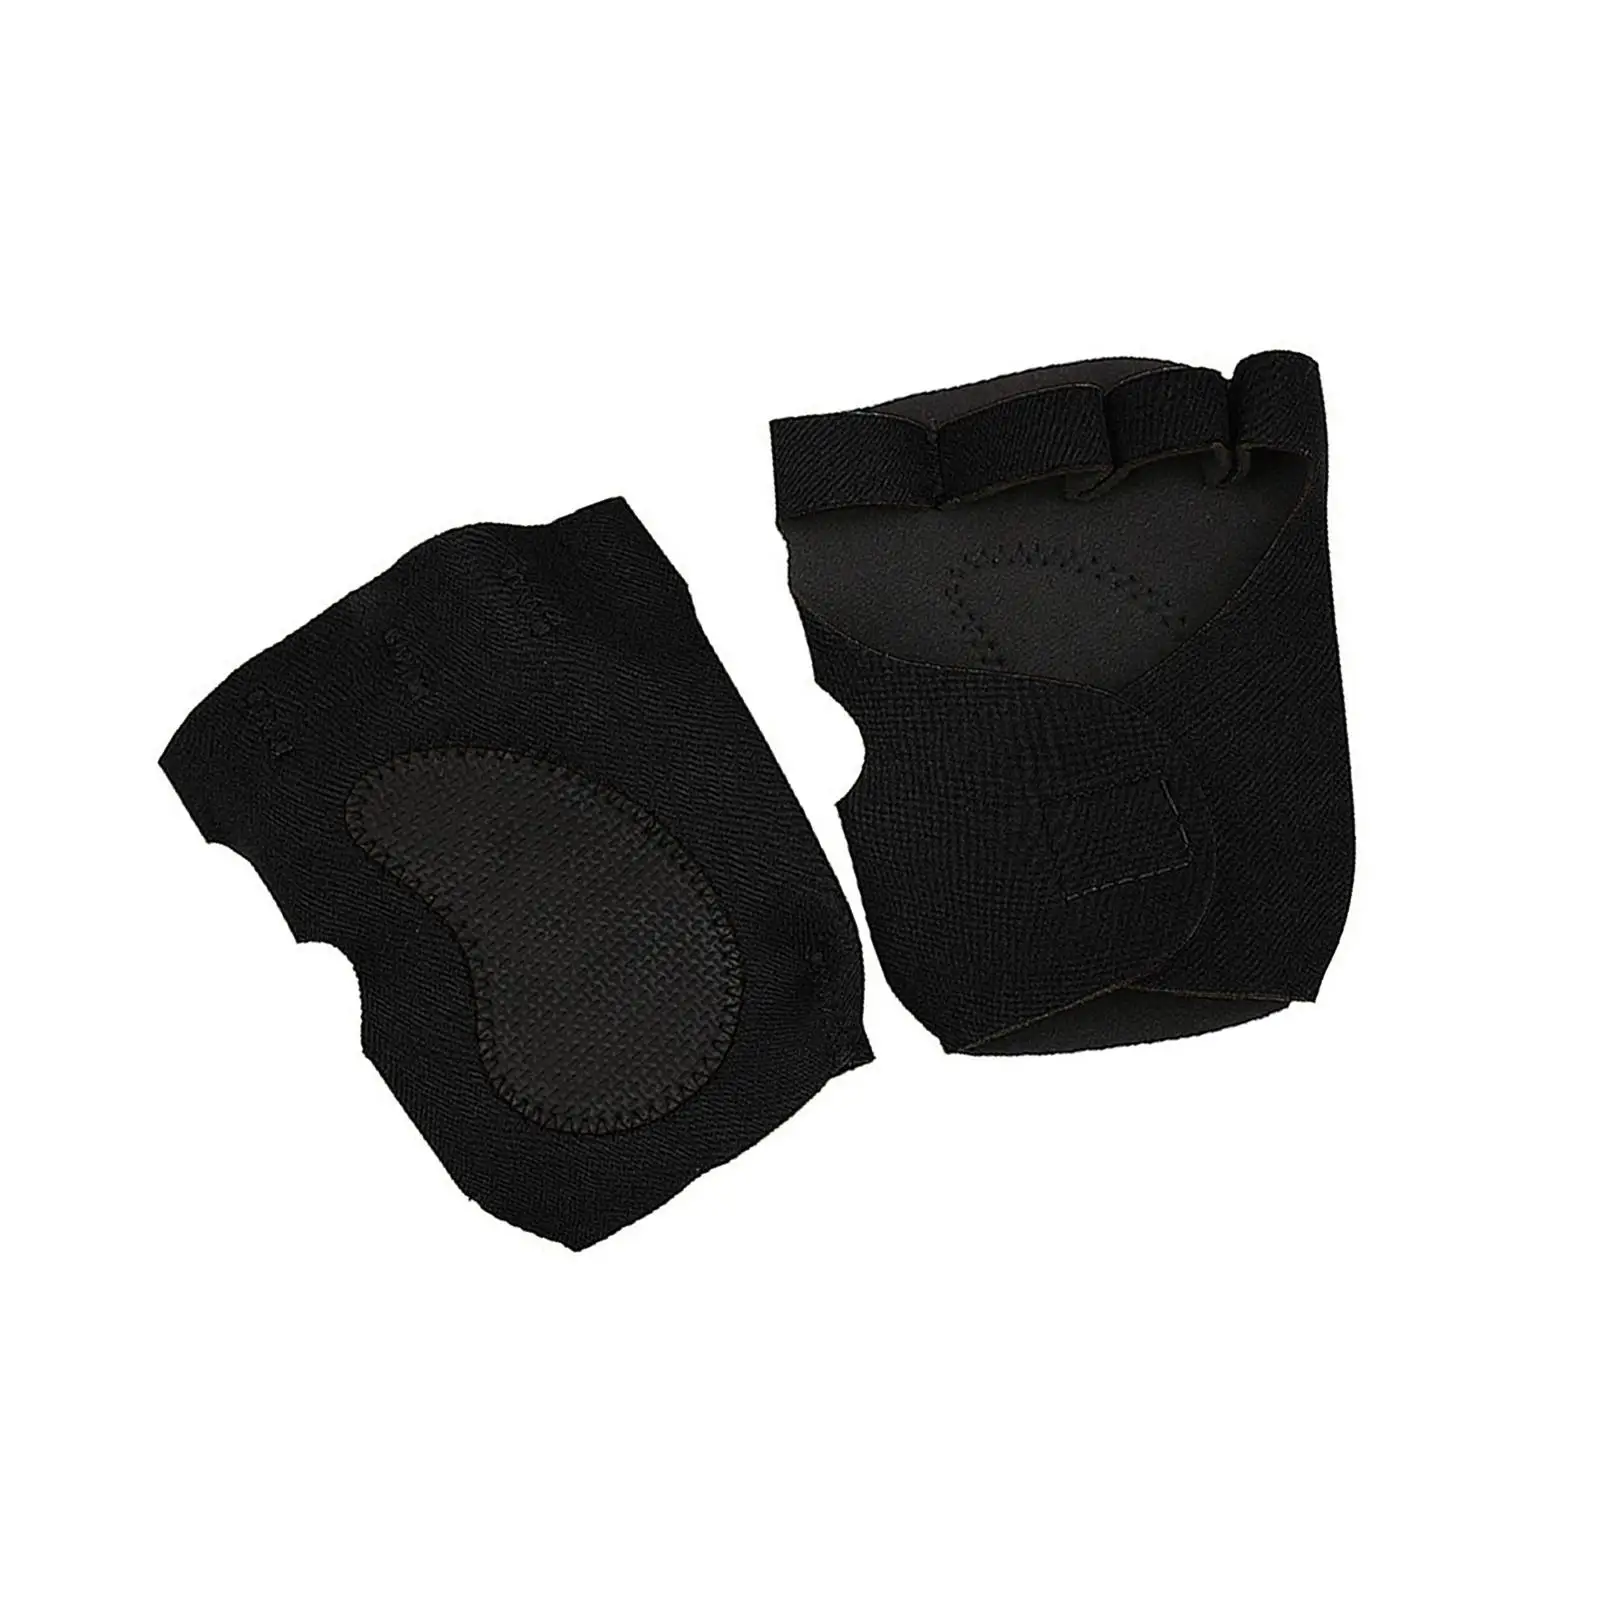 Weightlifting Gloves, Workout Gloves, Breathable Palm Protection, Cycling Gloves